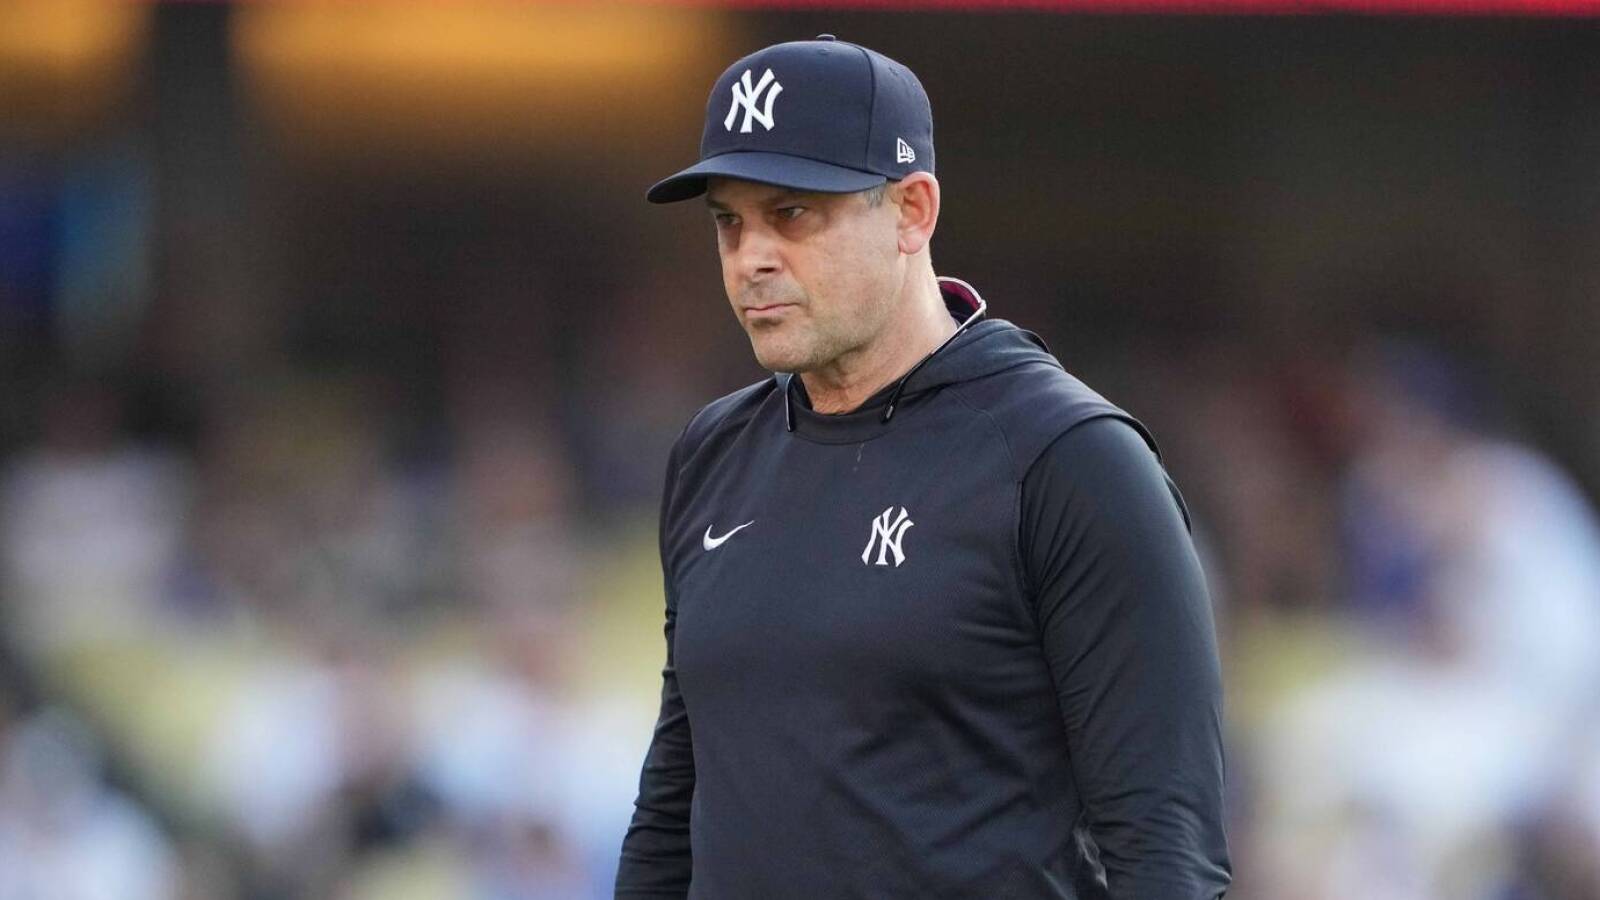 Red Sox icon voices support for Yankees' Aaron Boone